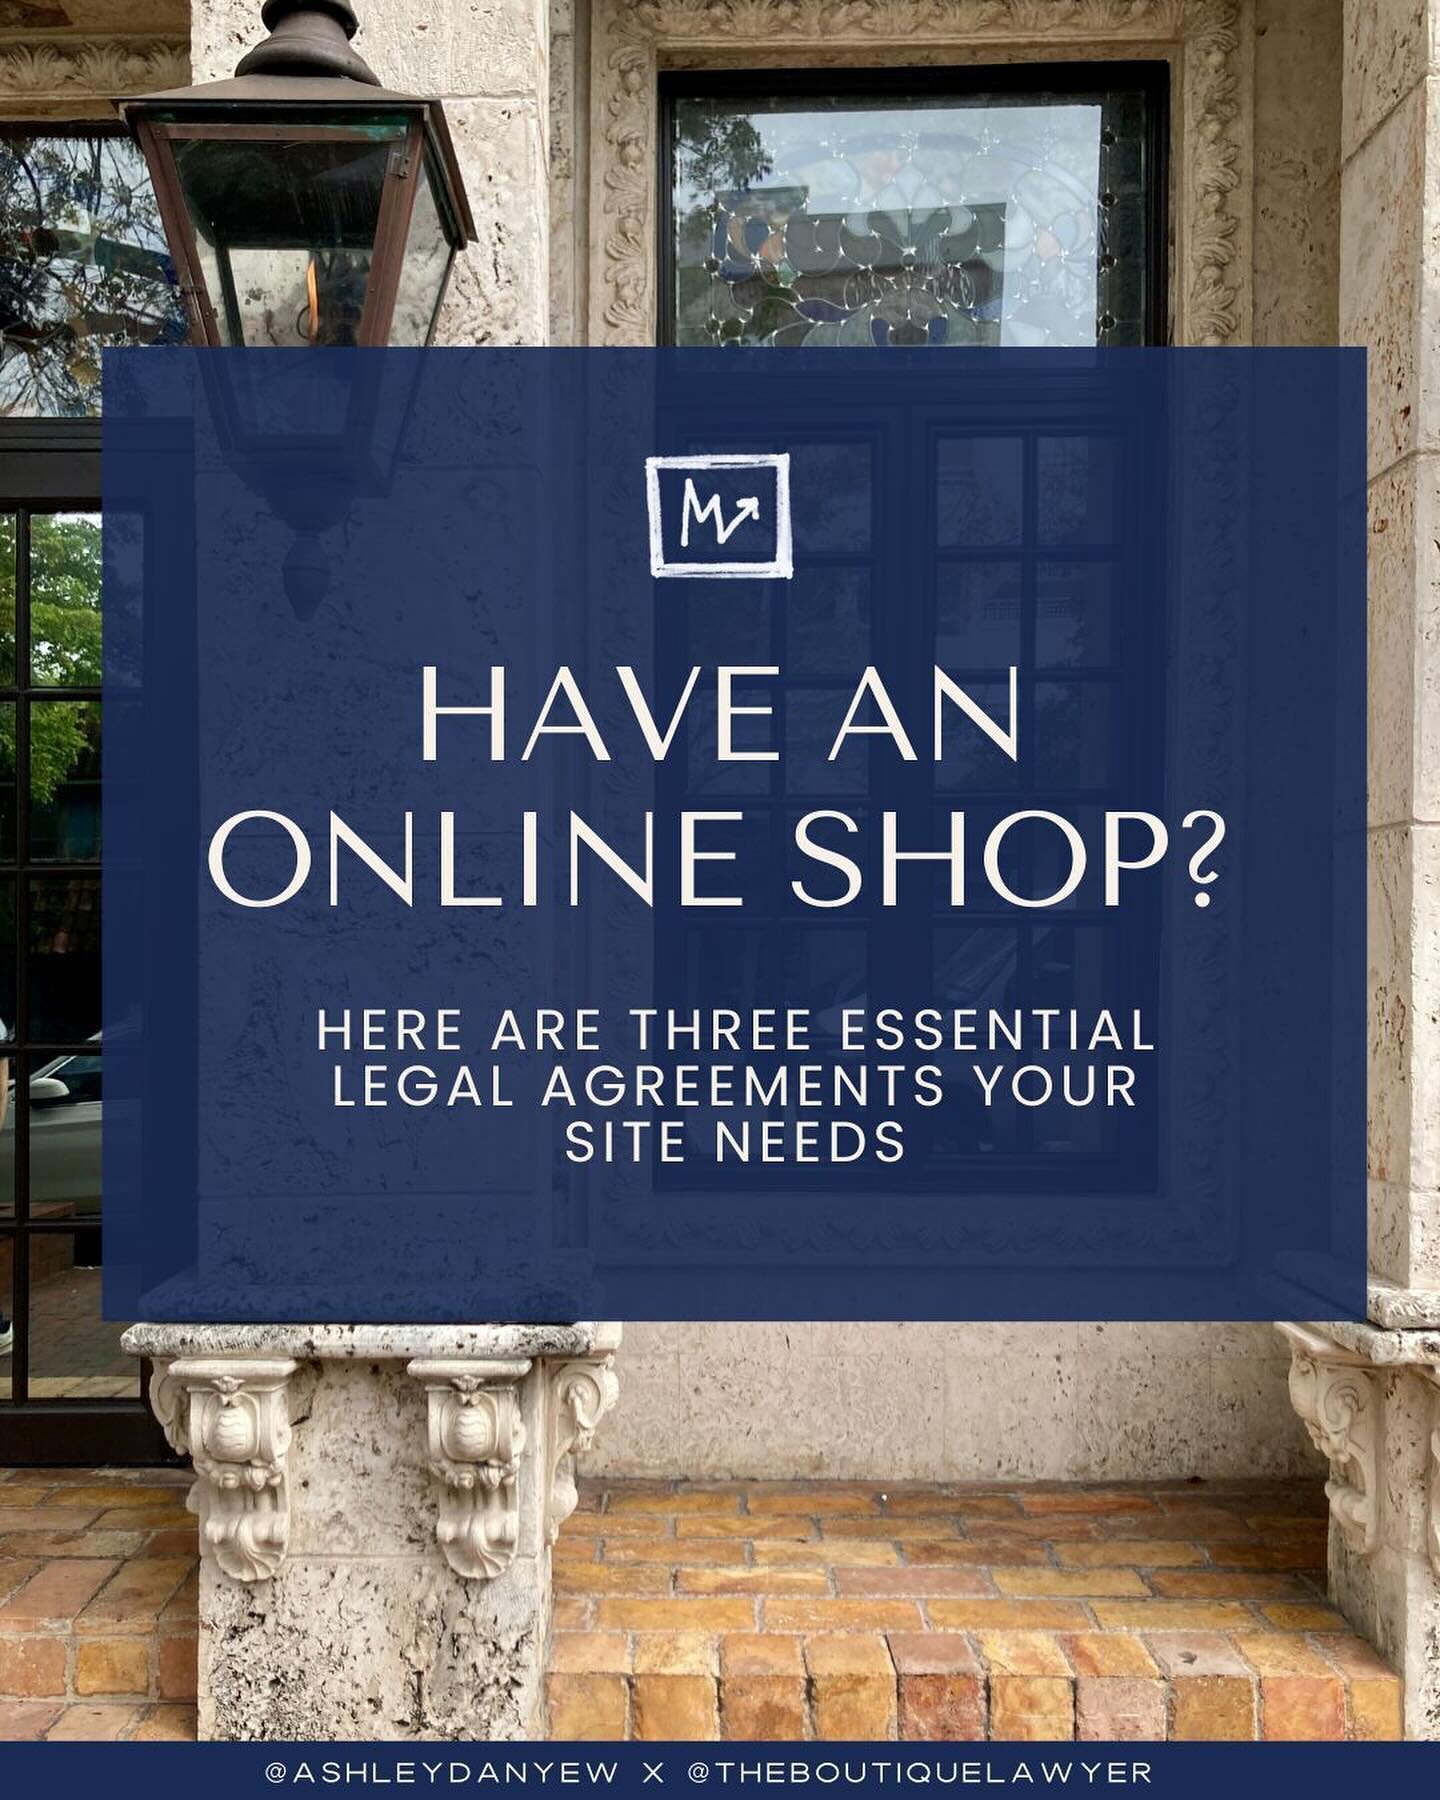 Let&rsquo;s talk about your line of defense against unexpected legal hurdles: solid contracts and bulletproof legal policies!

This week, Georgia-based attorney Amber Gilormo of @theboutiquelawyer is hosting a Spring sale in her contract template sho